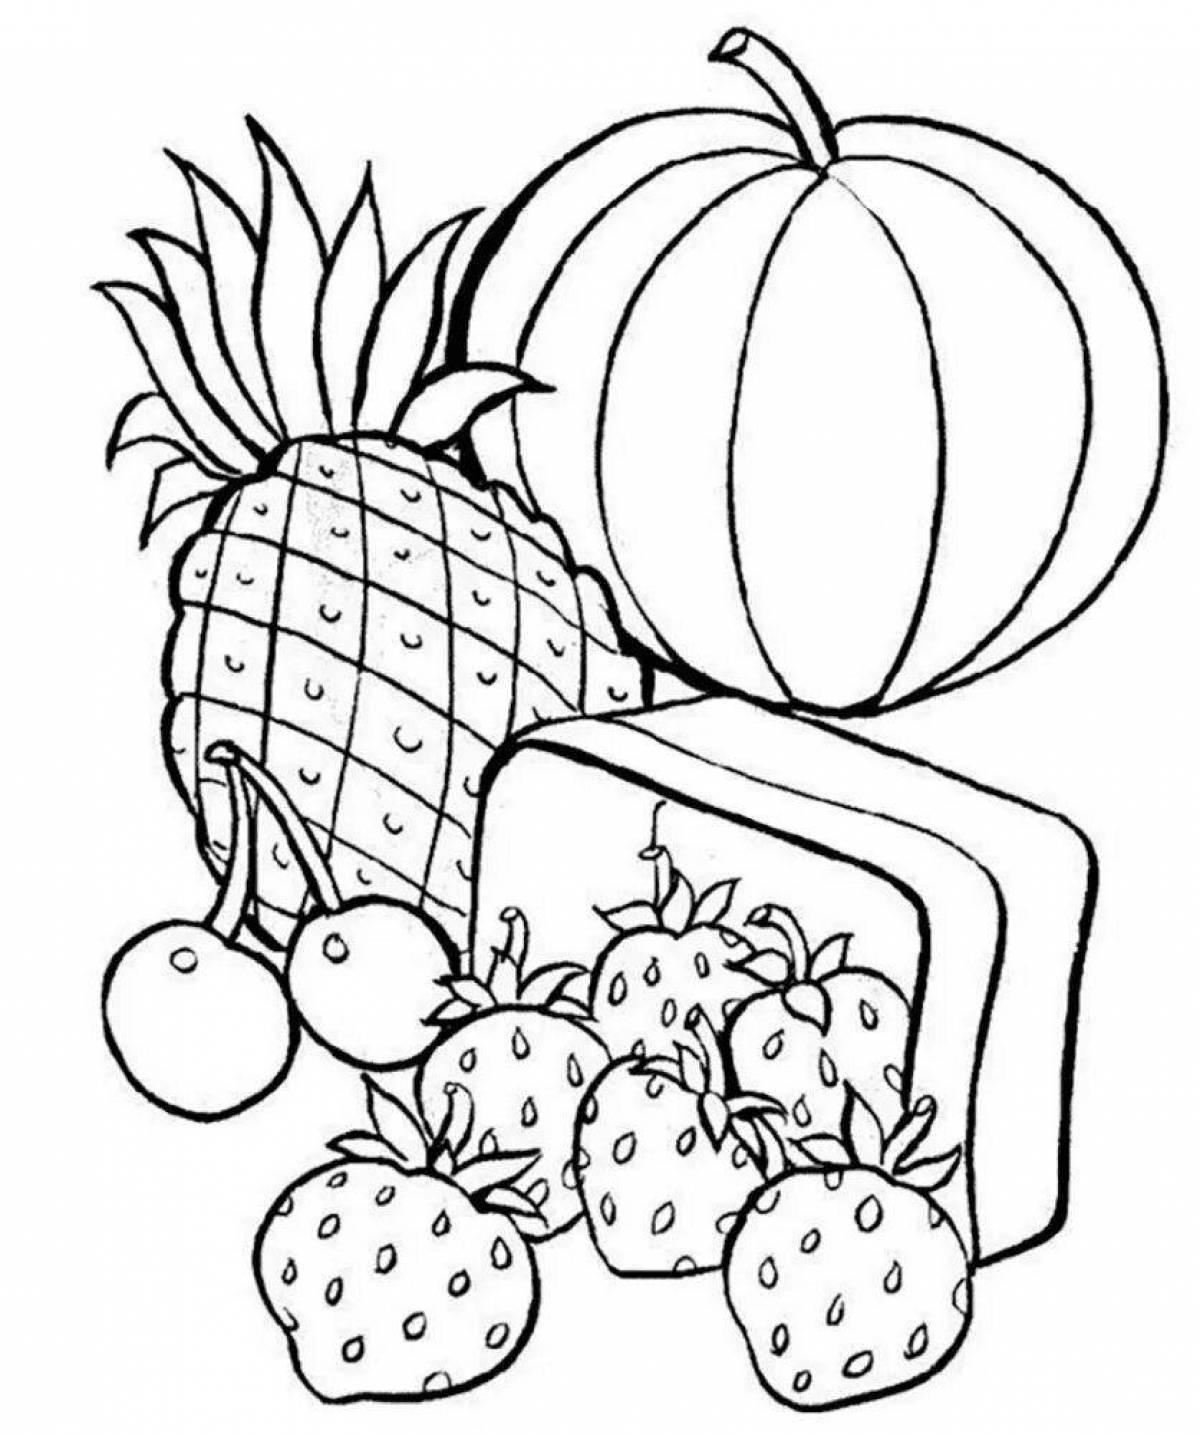 Gorgeous fruit coloring book for 5-6 year olds